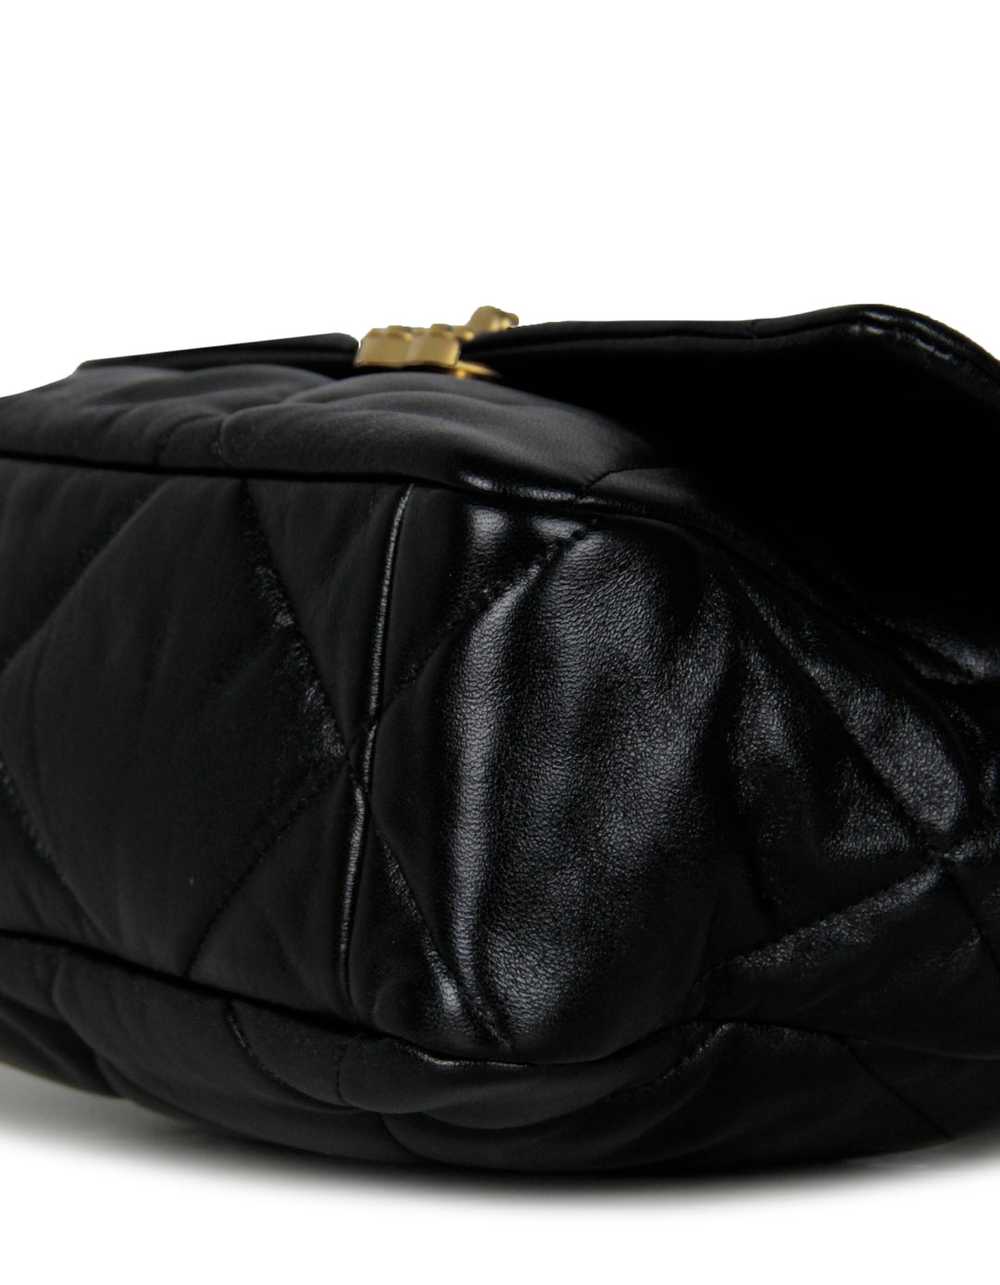 Chanel Black Lambskin Leather Quilted Large 19 Bag - image 5